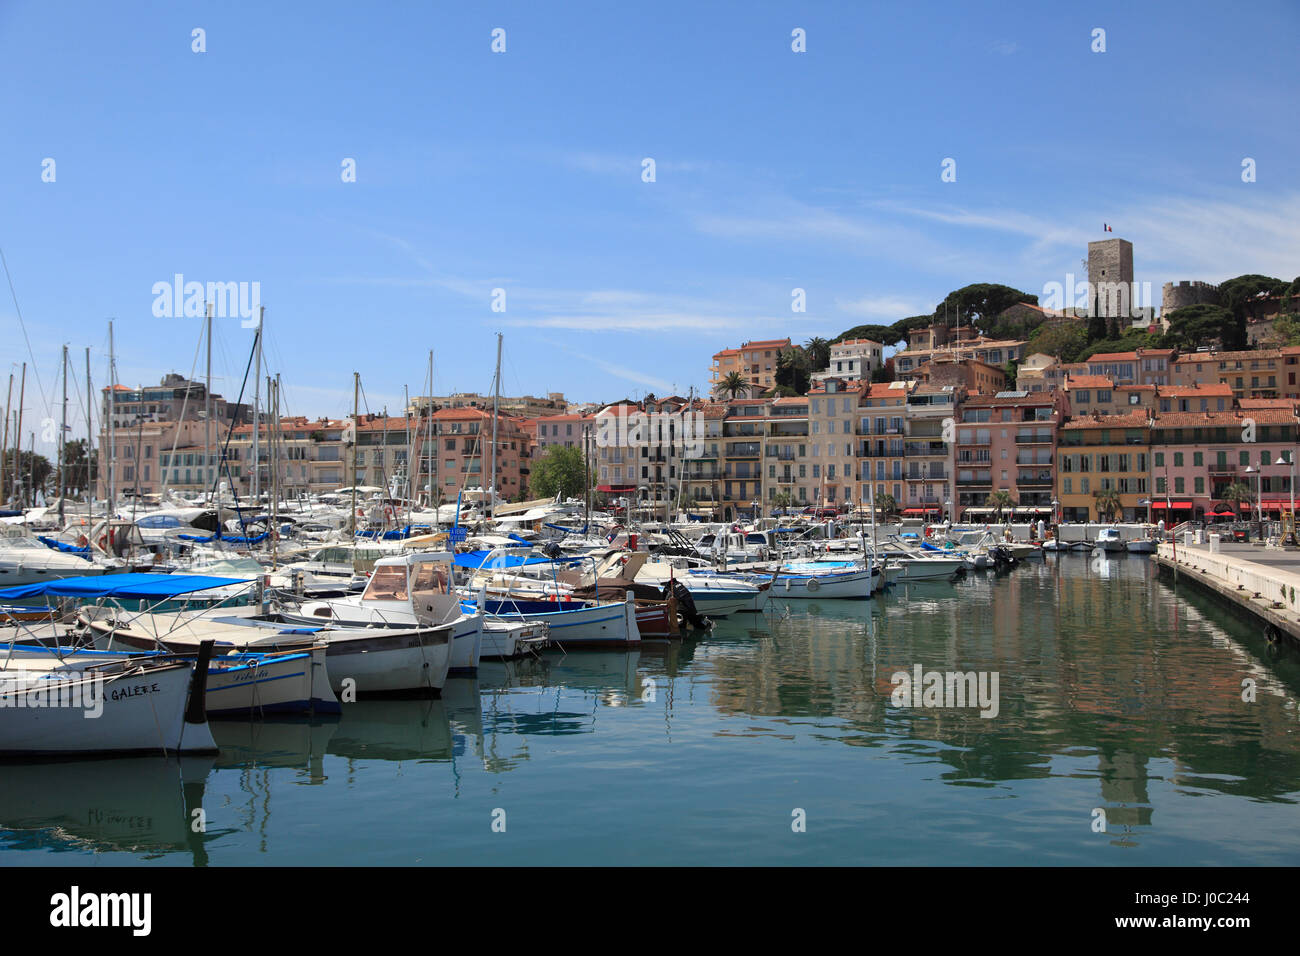 Harbor, Le Suquet, Old Town, Cannes, Alpes Maritimes, Cote d'Azur, Provence, French Riviera, France, Mediterranean Stock Photo